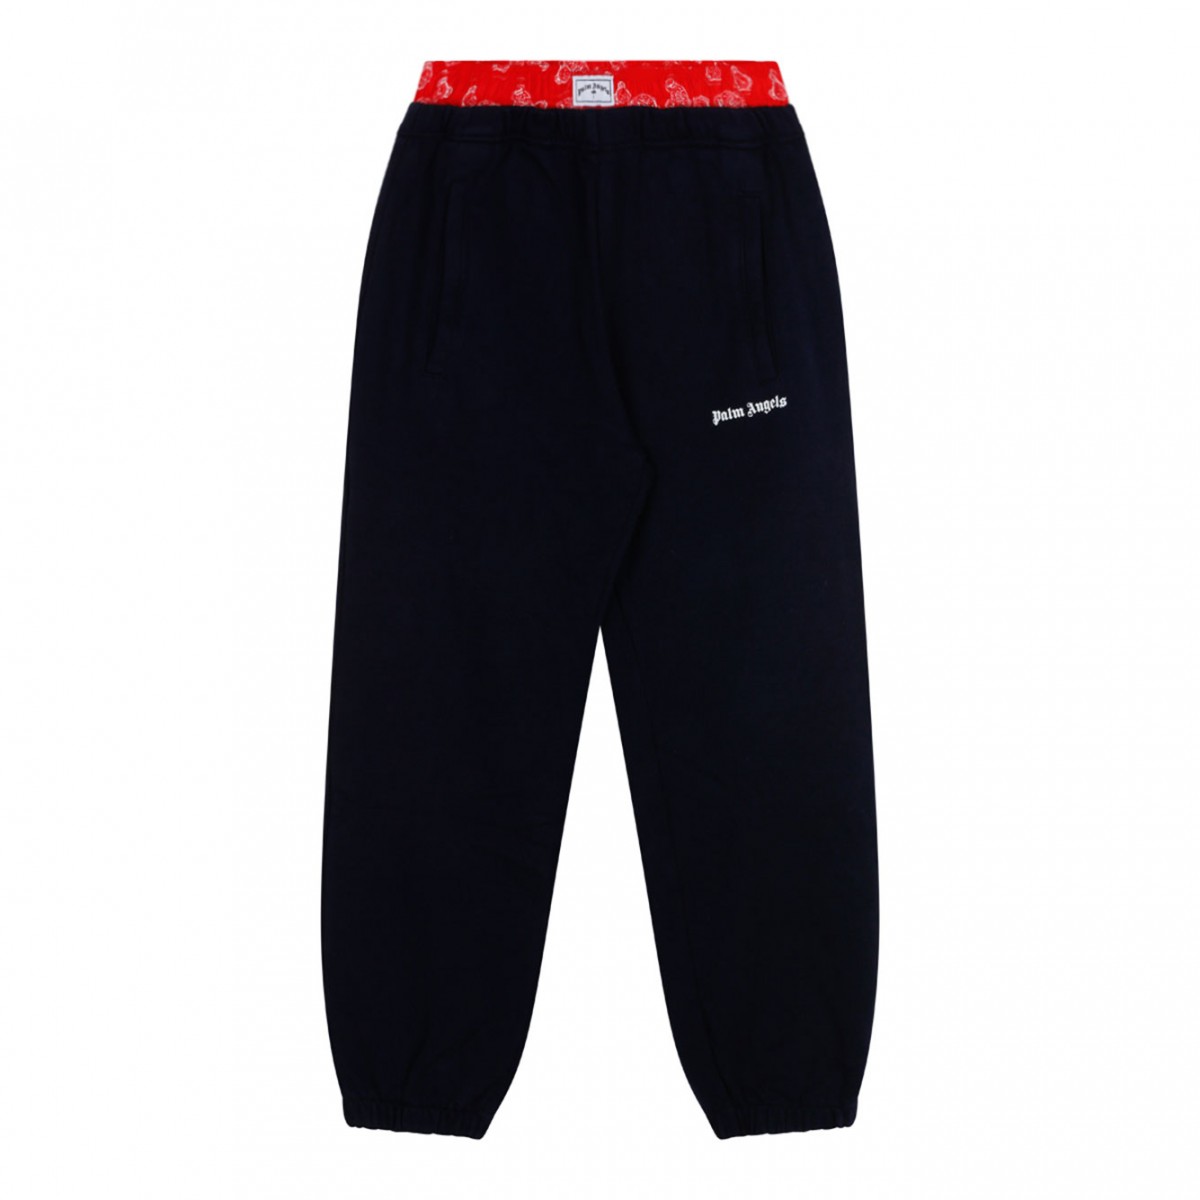 Navy Blue and Red Cotton Track Pants